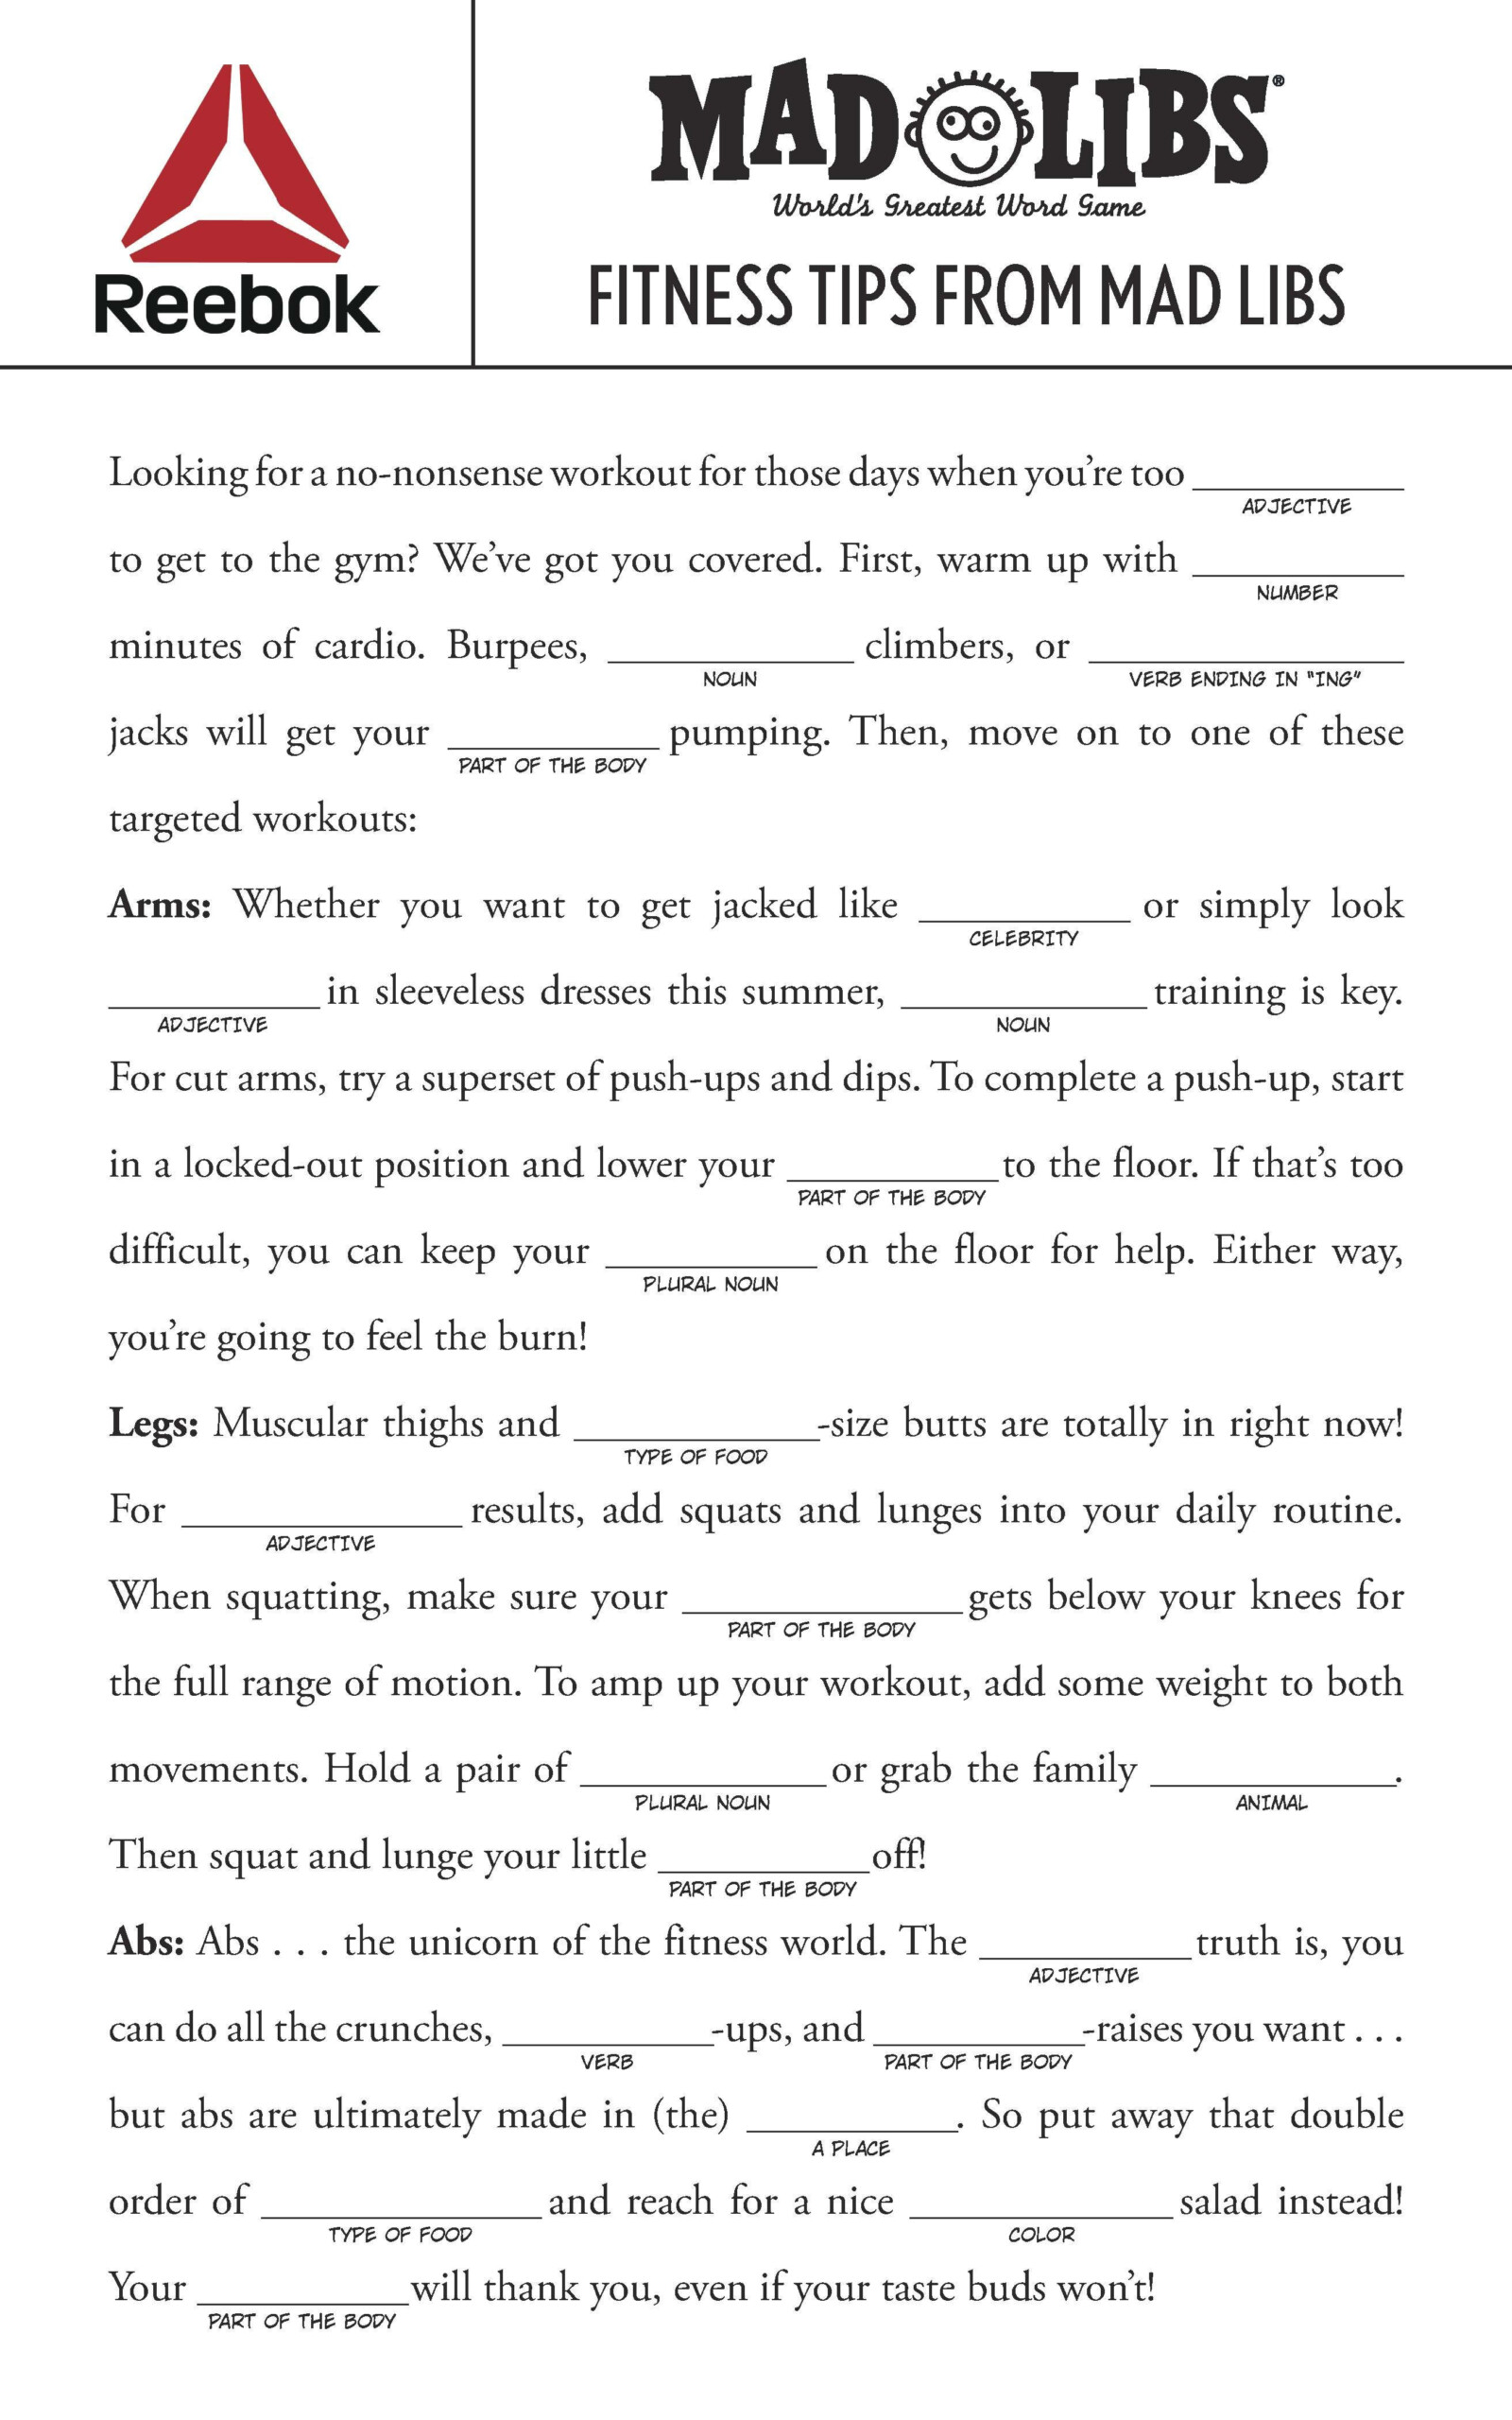 Get Fit With This ADJECTIVE Mad Libs Workout Mad Libs Funny Mad